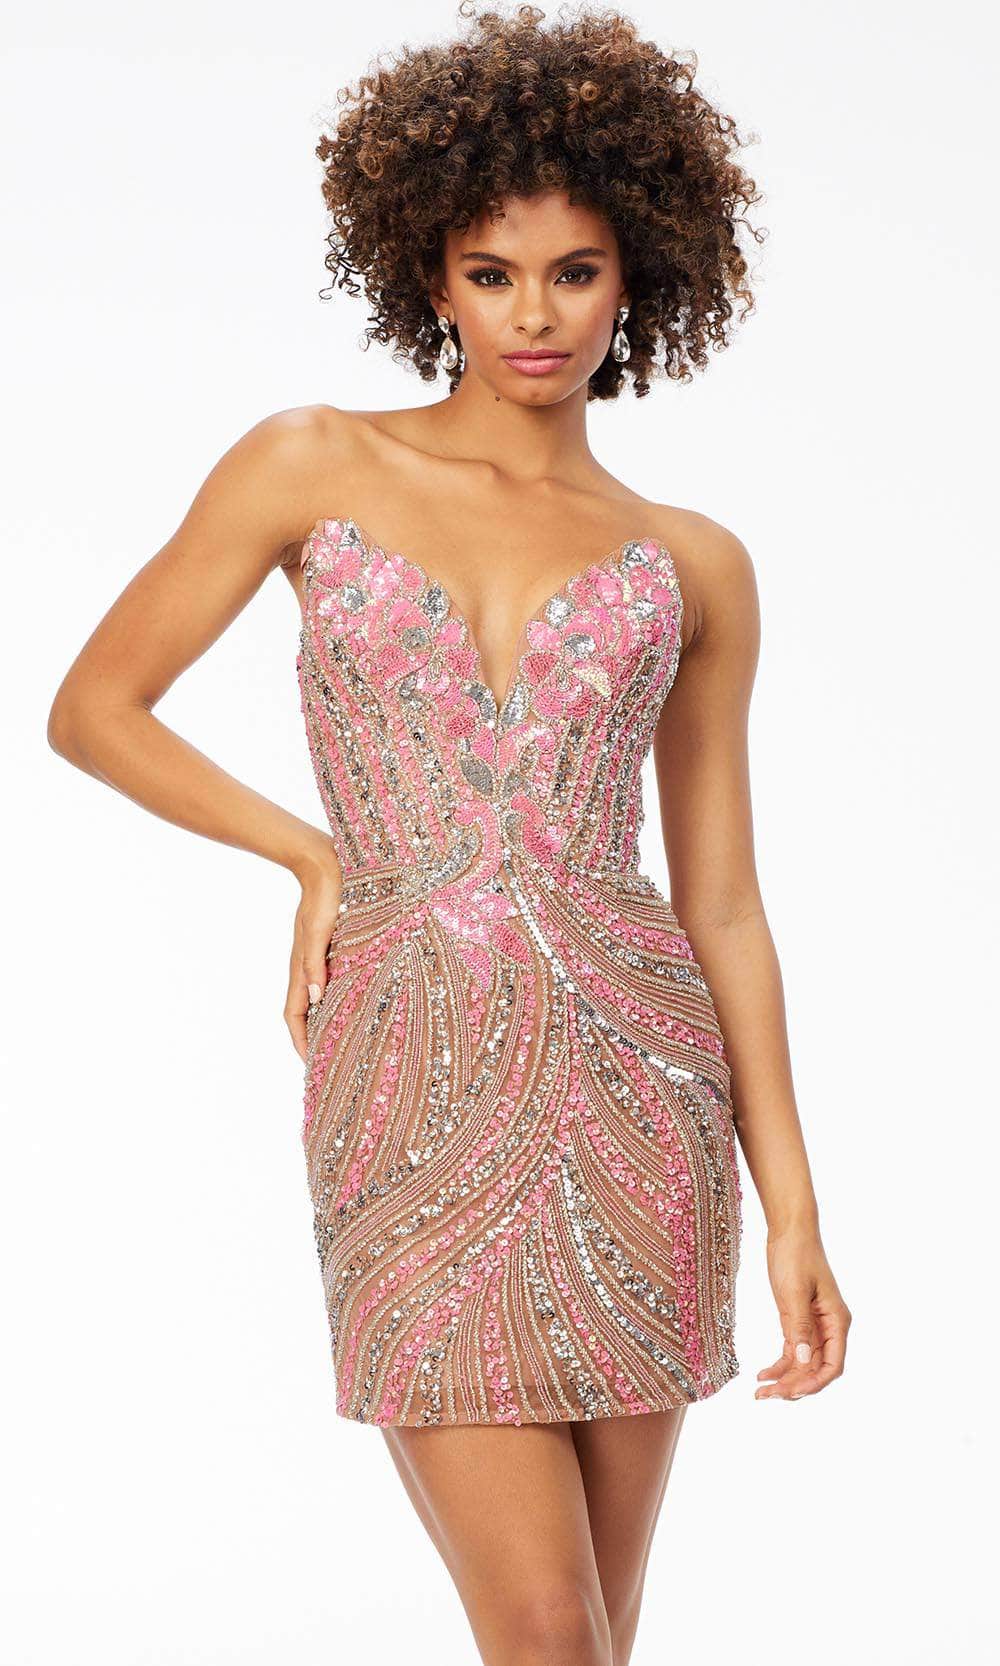 Ashley Lauren 4500 - Strapless Sequin Cocktail Dress Special Occasion Dress 00 / Pink/Nude